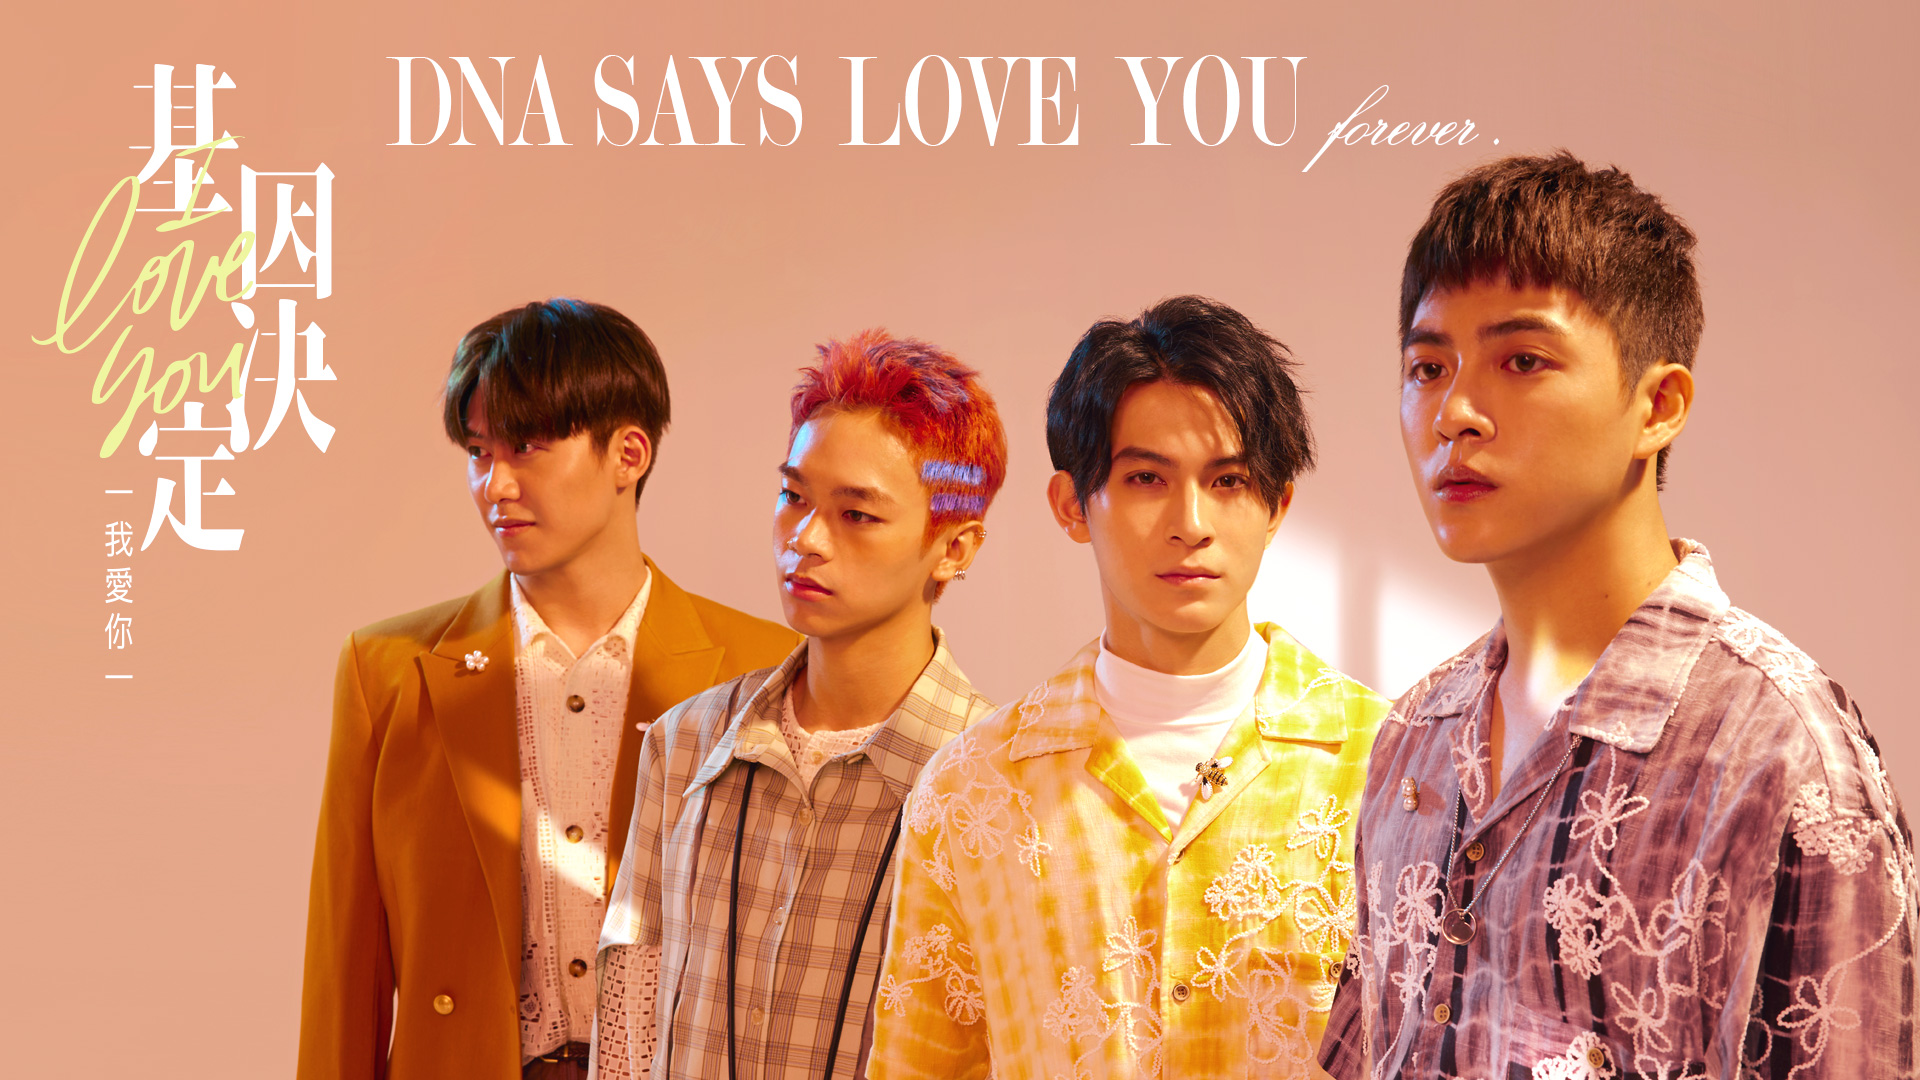 DNA Says Love You